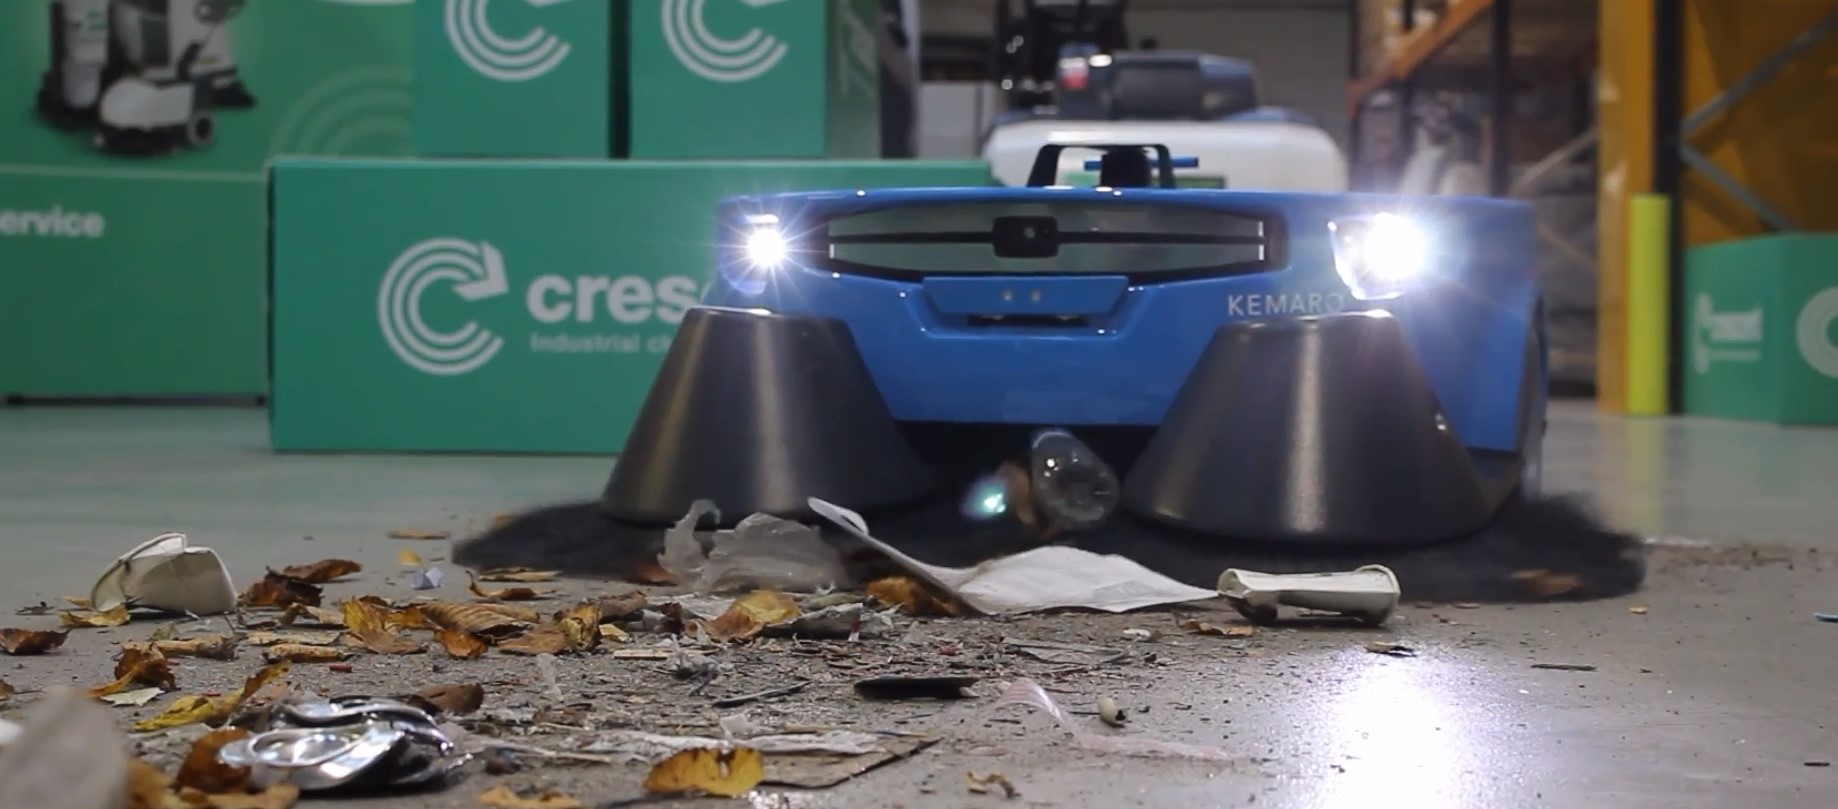 Depot cleaning robot appearing at show